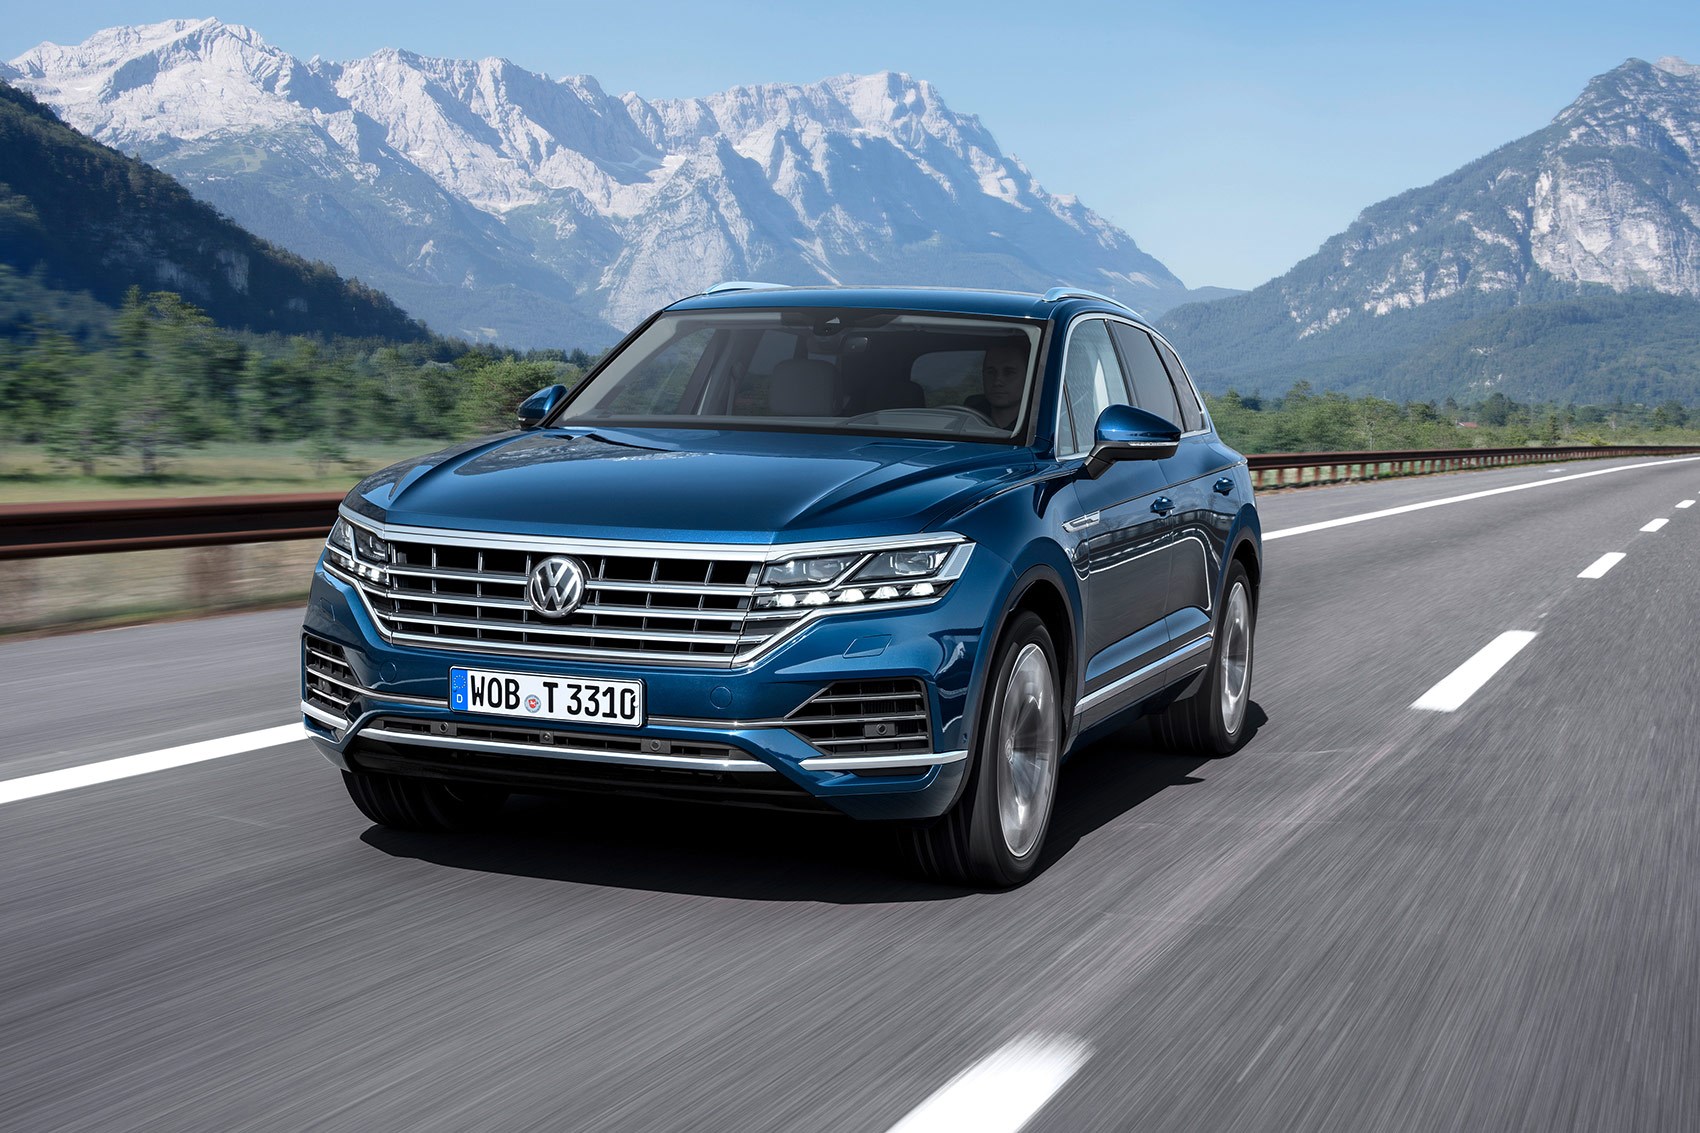 The new VW Touareg 2018: the CAR magazine full review, specs and prices